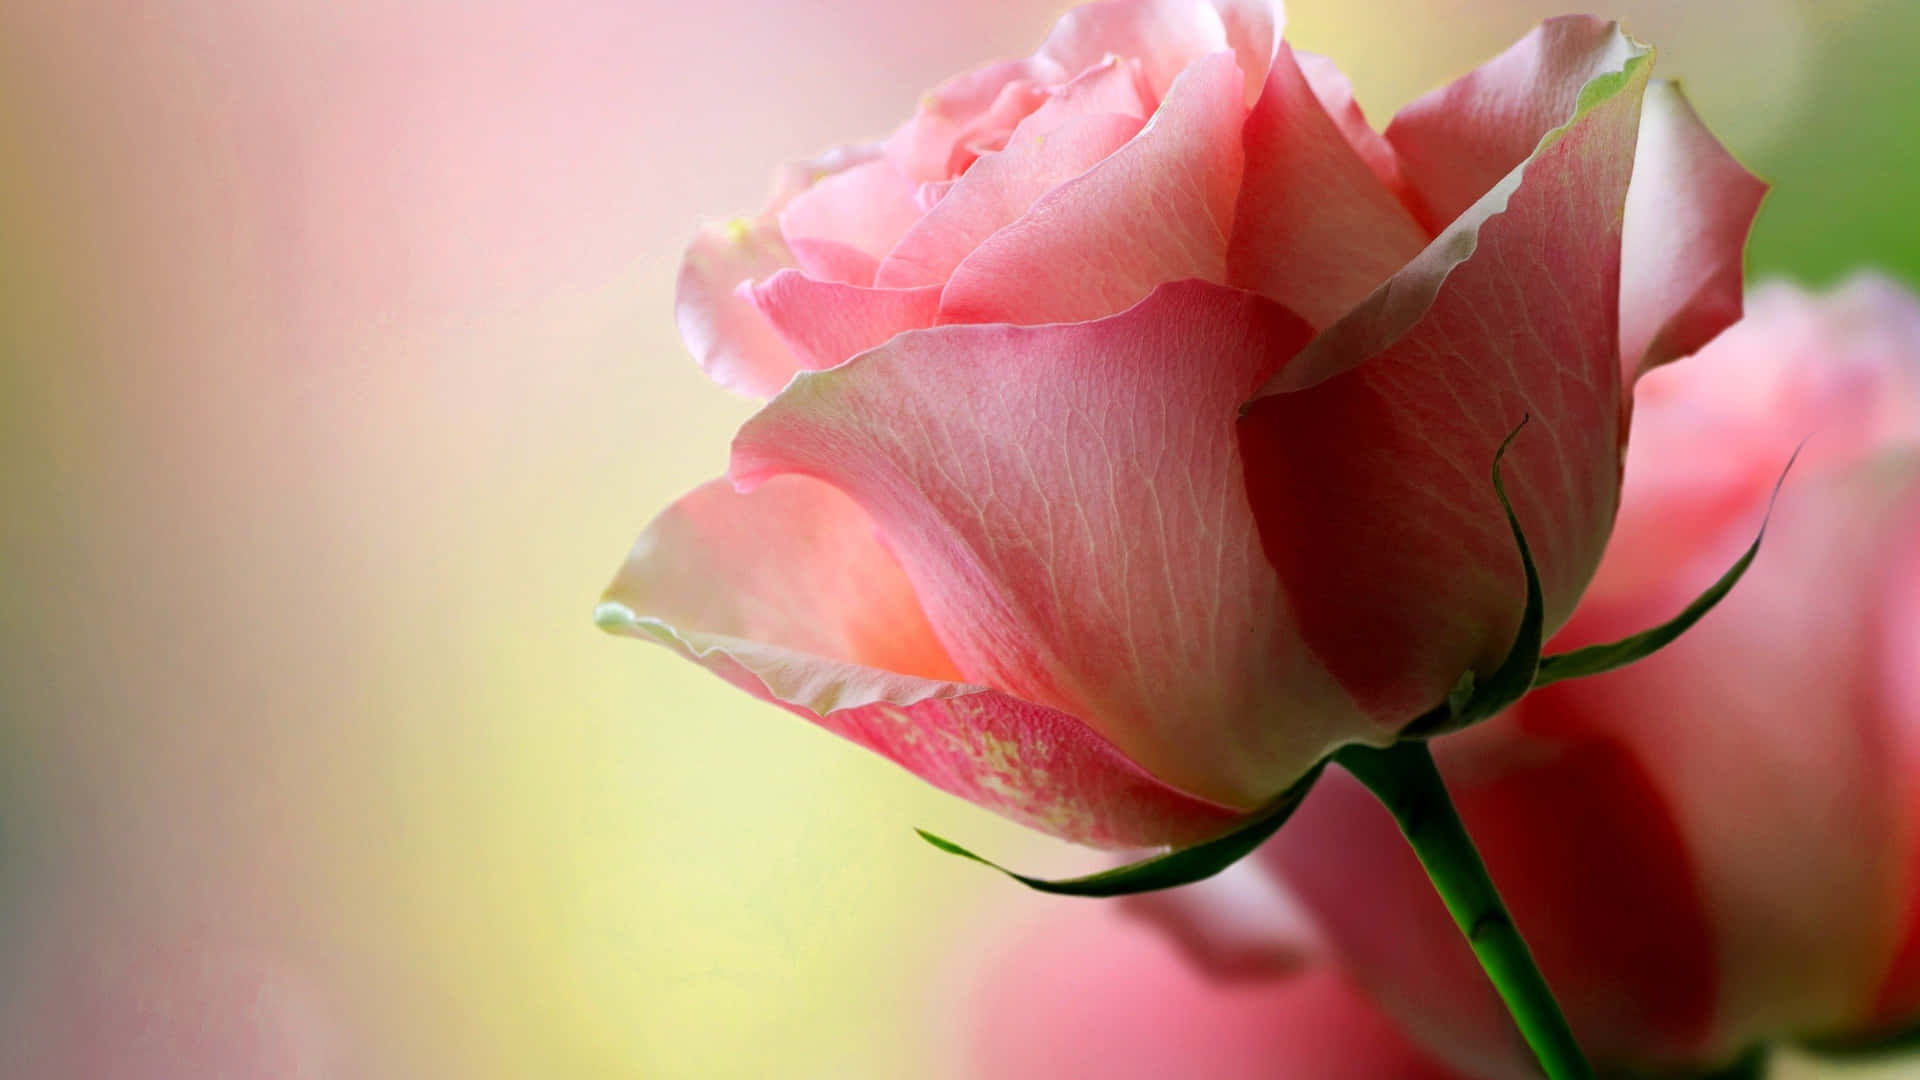 A single Red Rose surrounded by soft light. Wallpaper